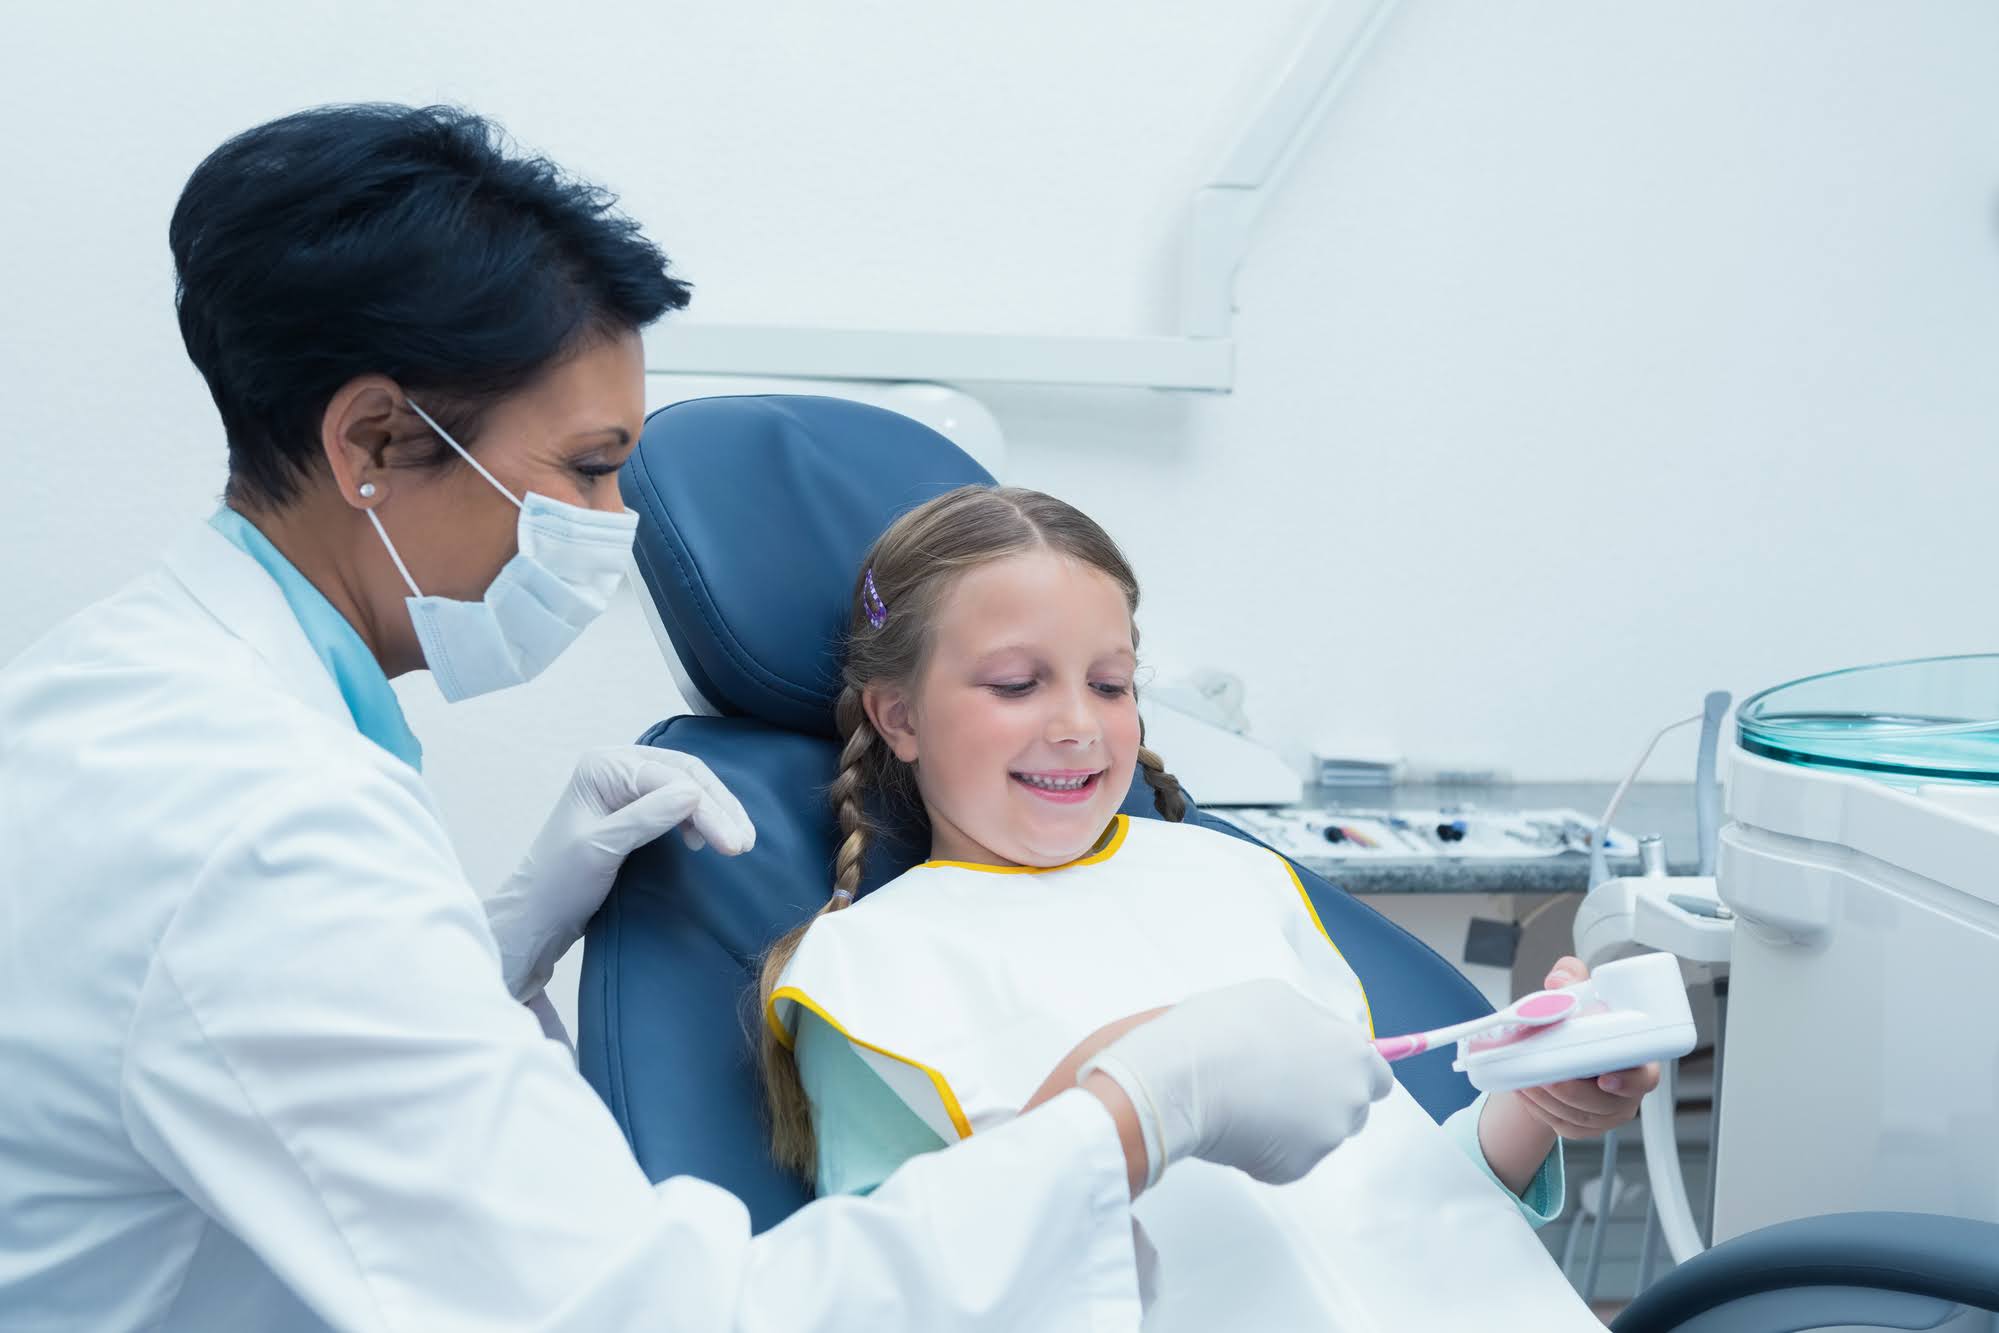 This is the image for the news article titled 5 Ways a Pediatric Dentist Calms Anxiety